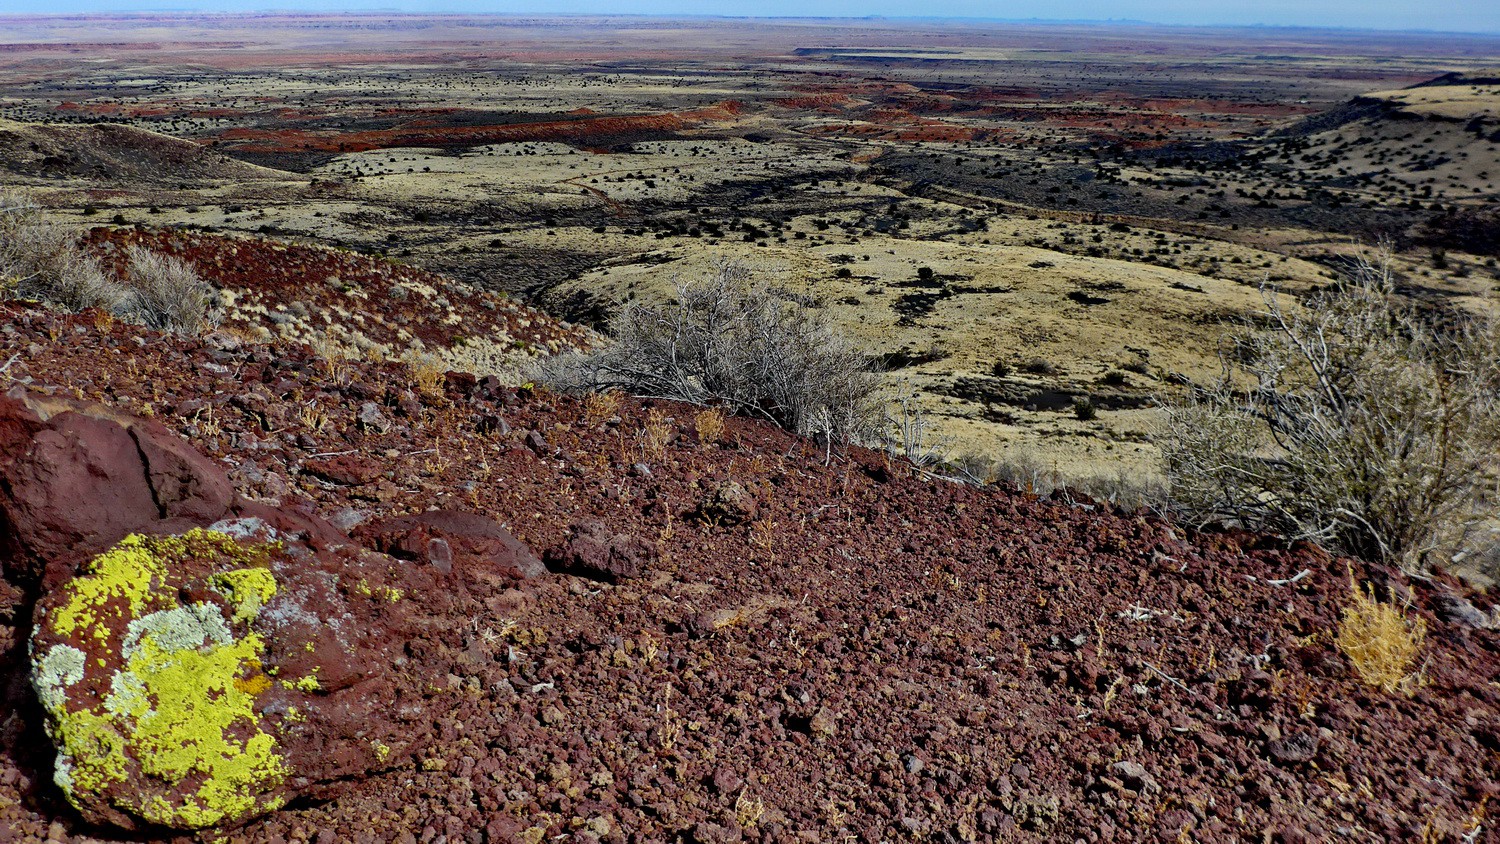 Painted Desert from the southern summit of Doney Mountain